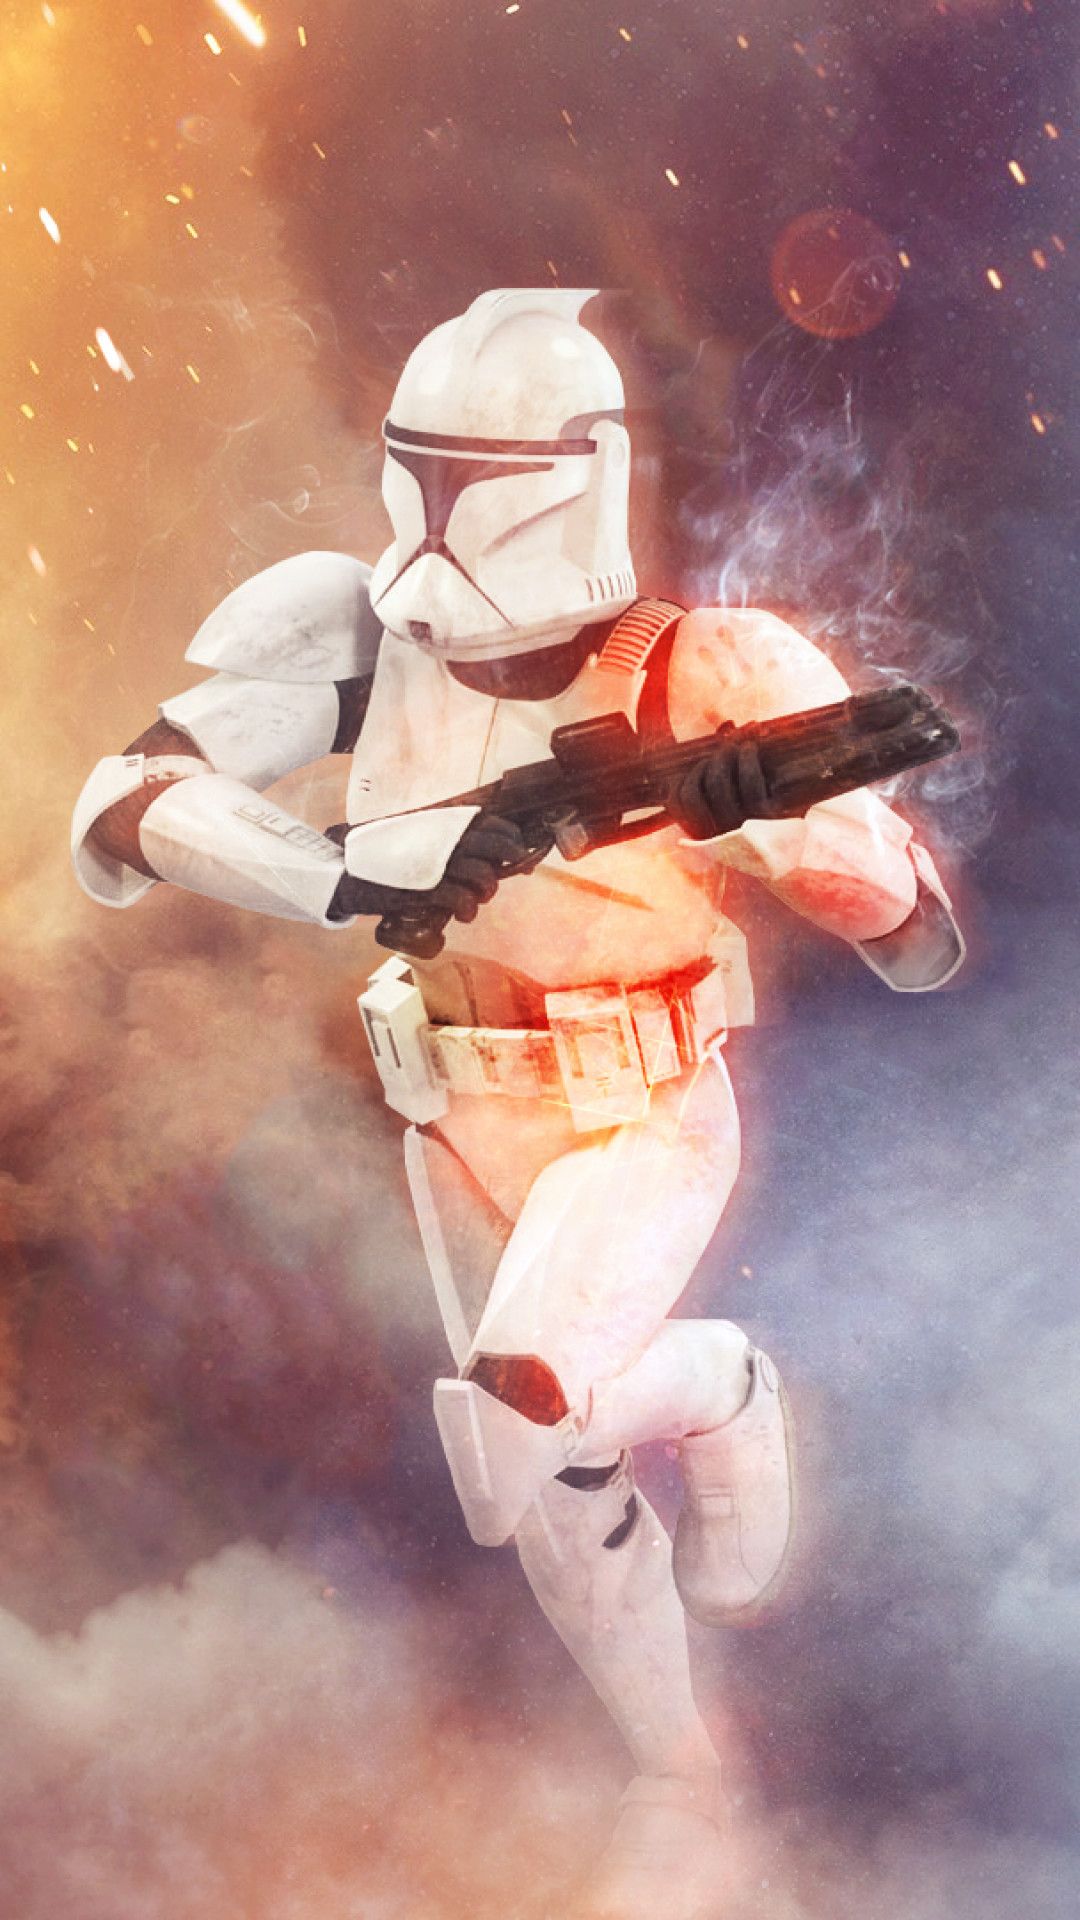 1080x Amazing Background Of The Day Wars Clone Trooper Wallpaper iPhone